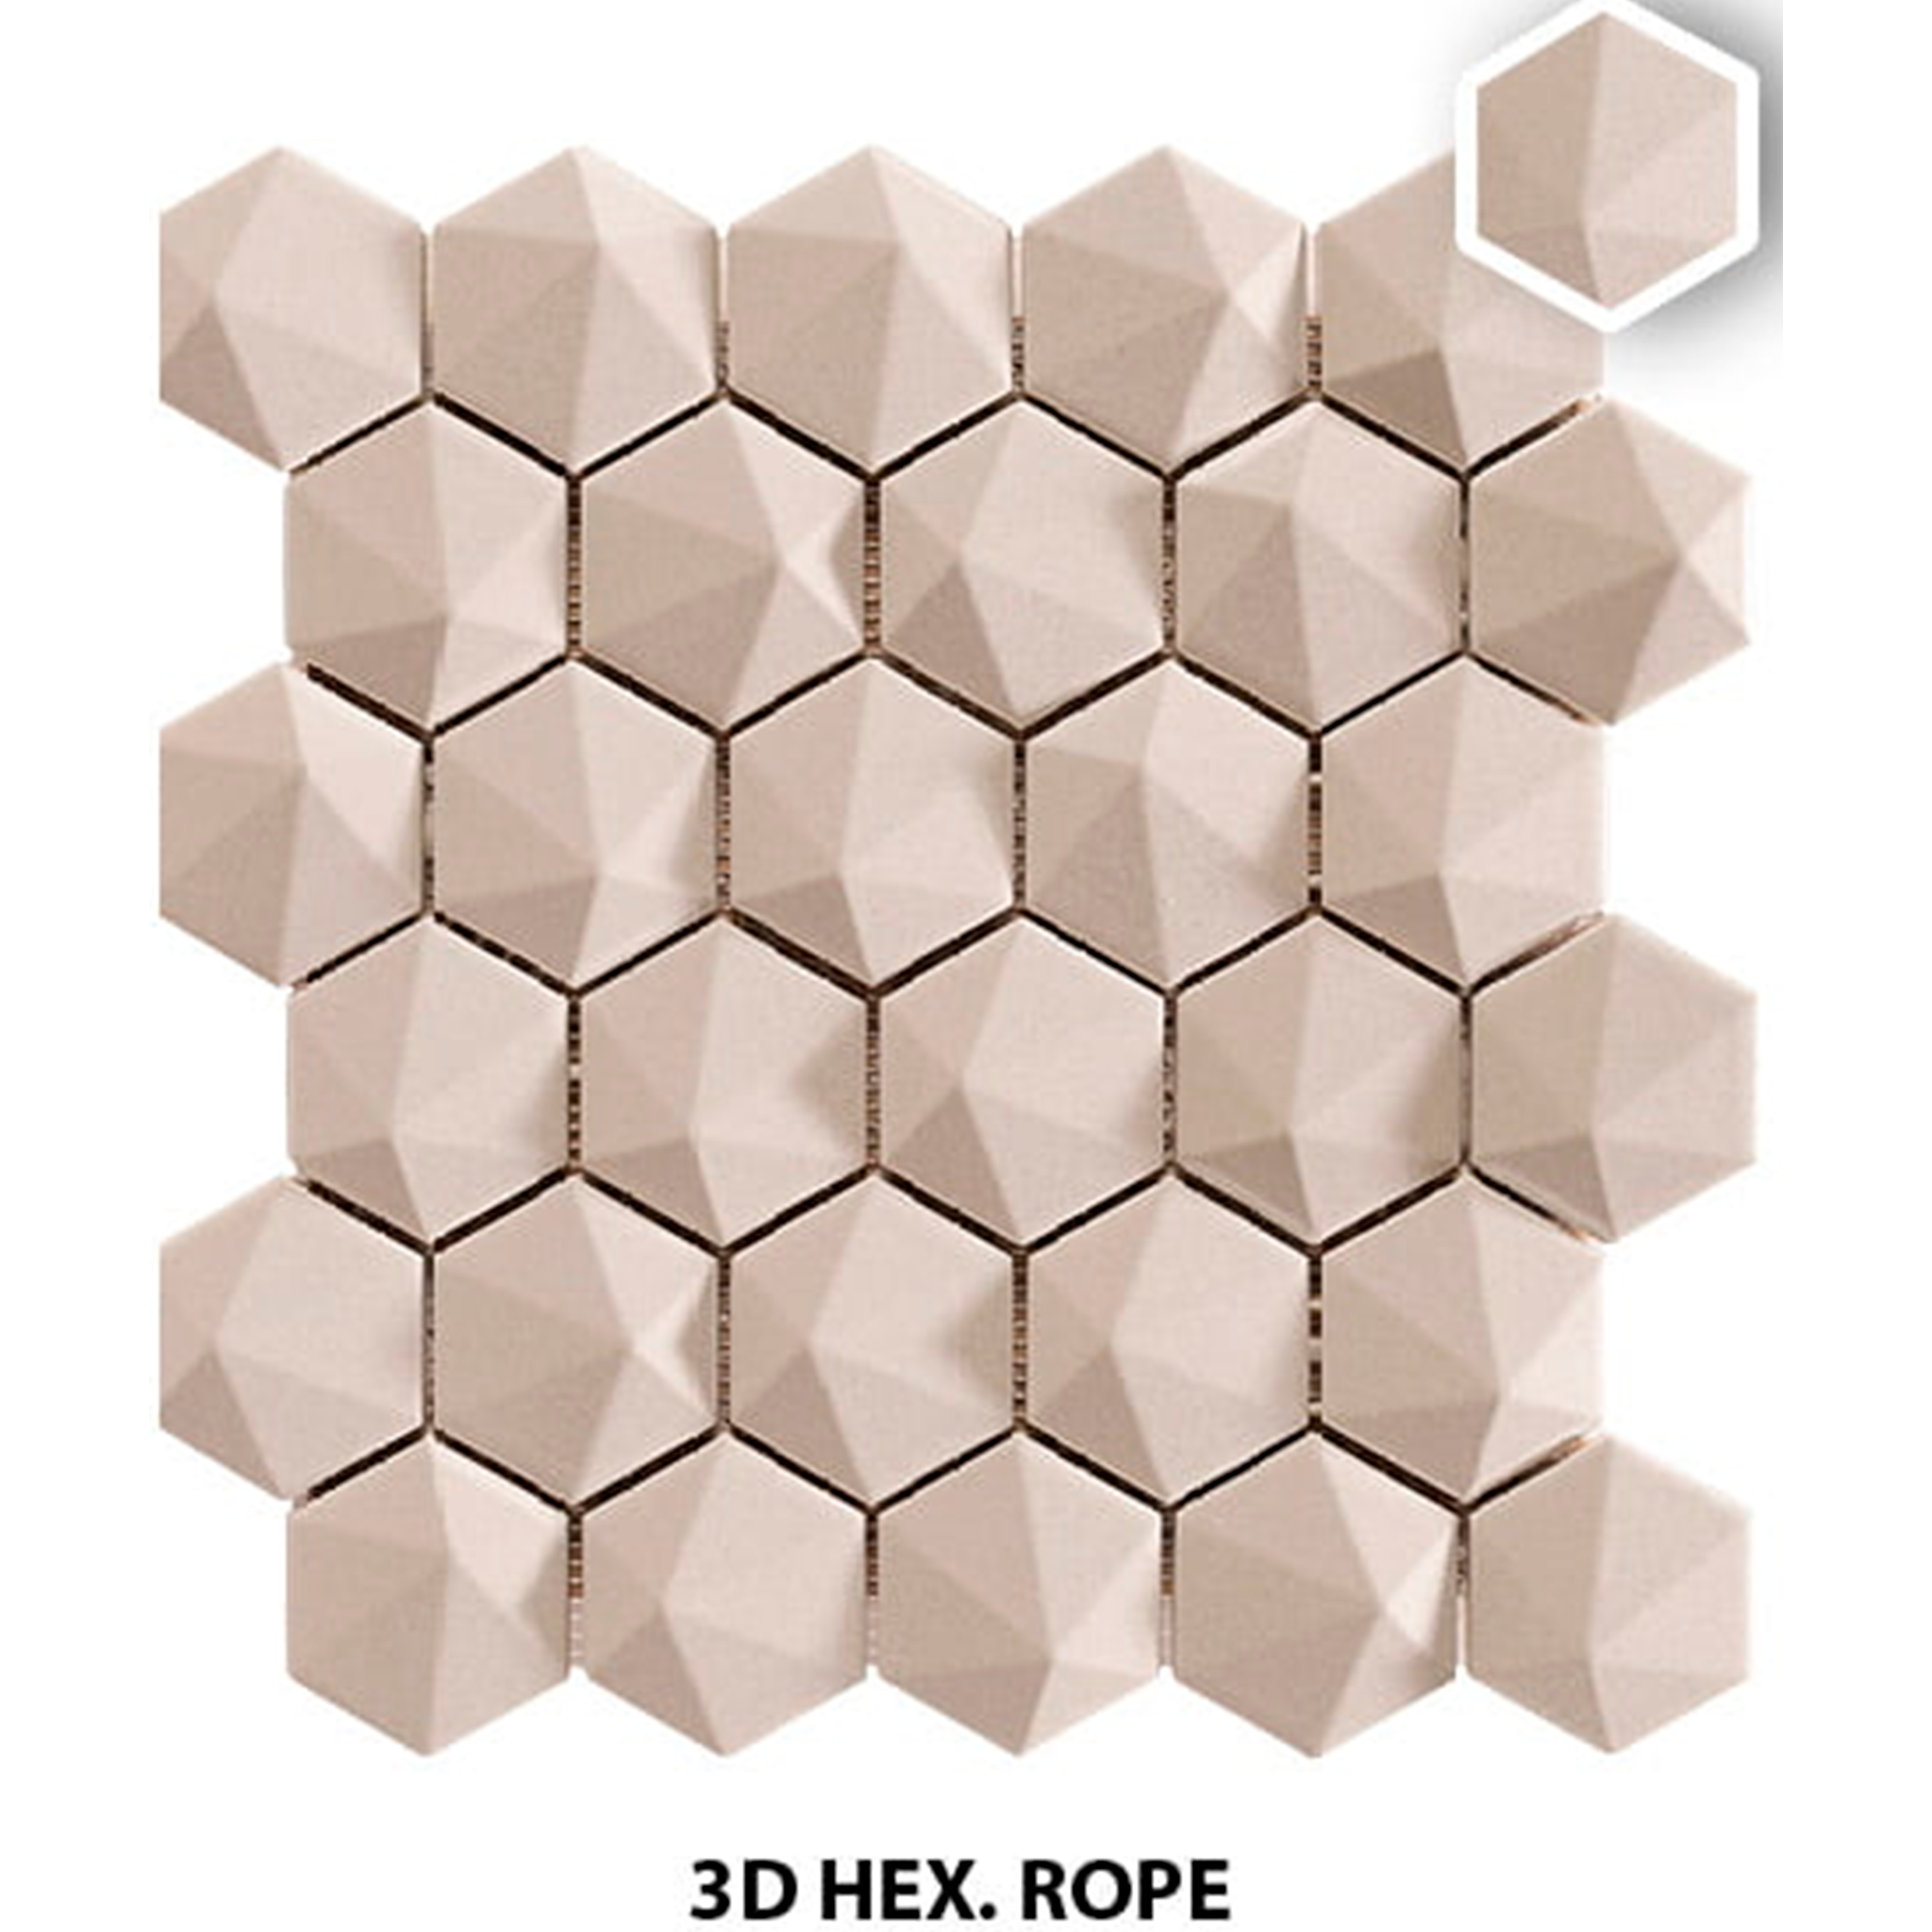 3Dhex Rope